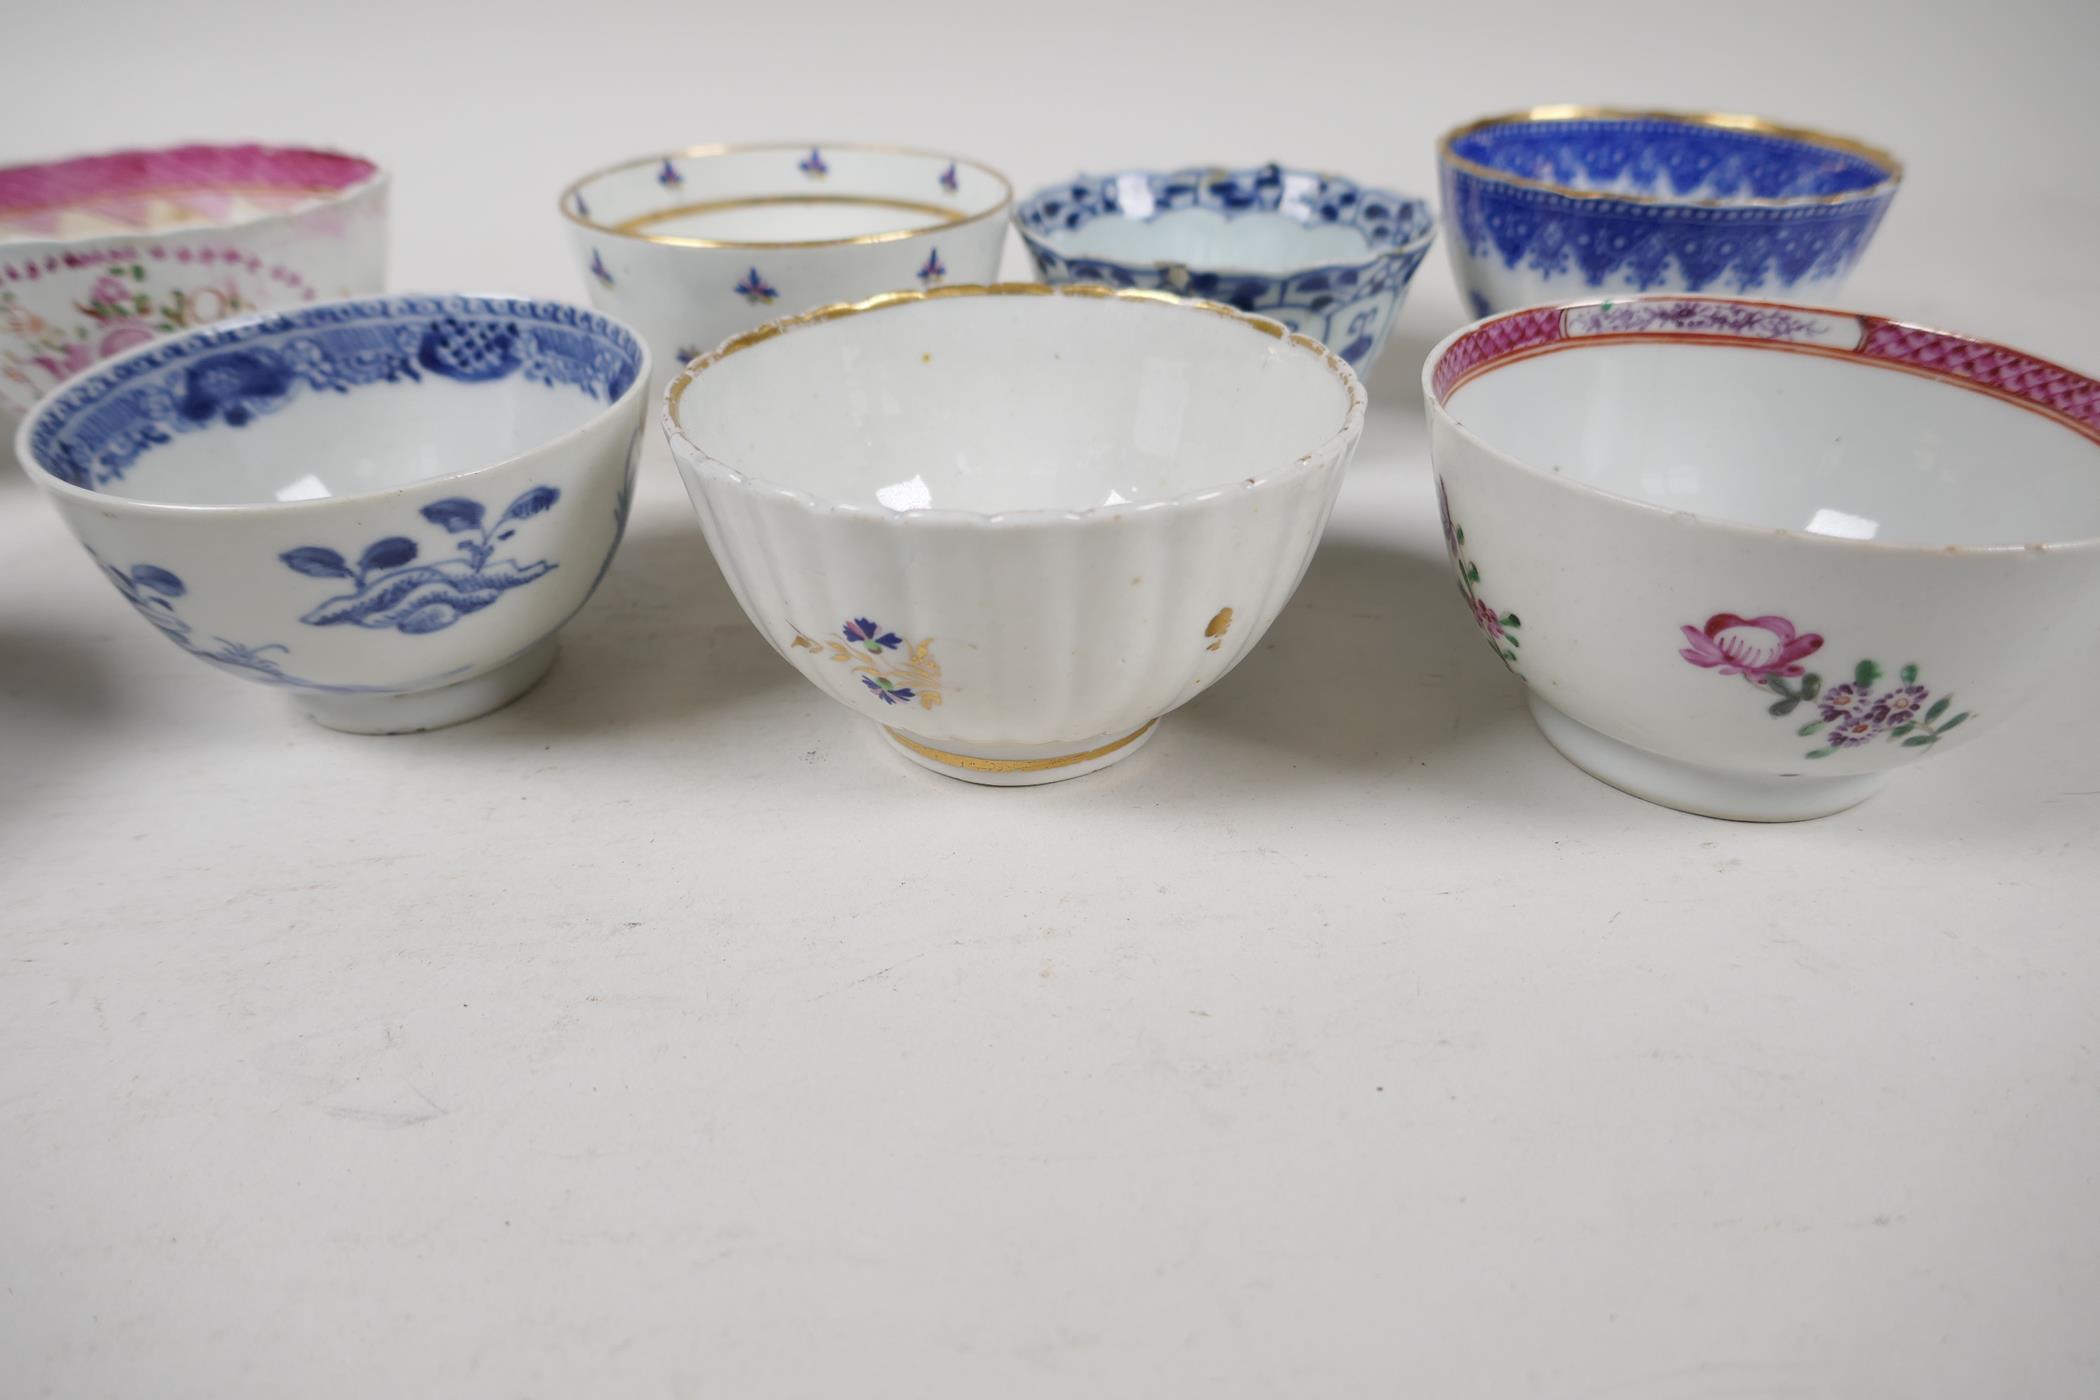 Fifteen porcelain tea bowls, English and Chinese, most late C18th, largest 3½" diameter - Image 5 of 9